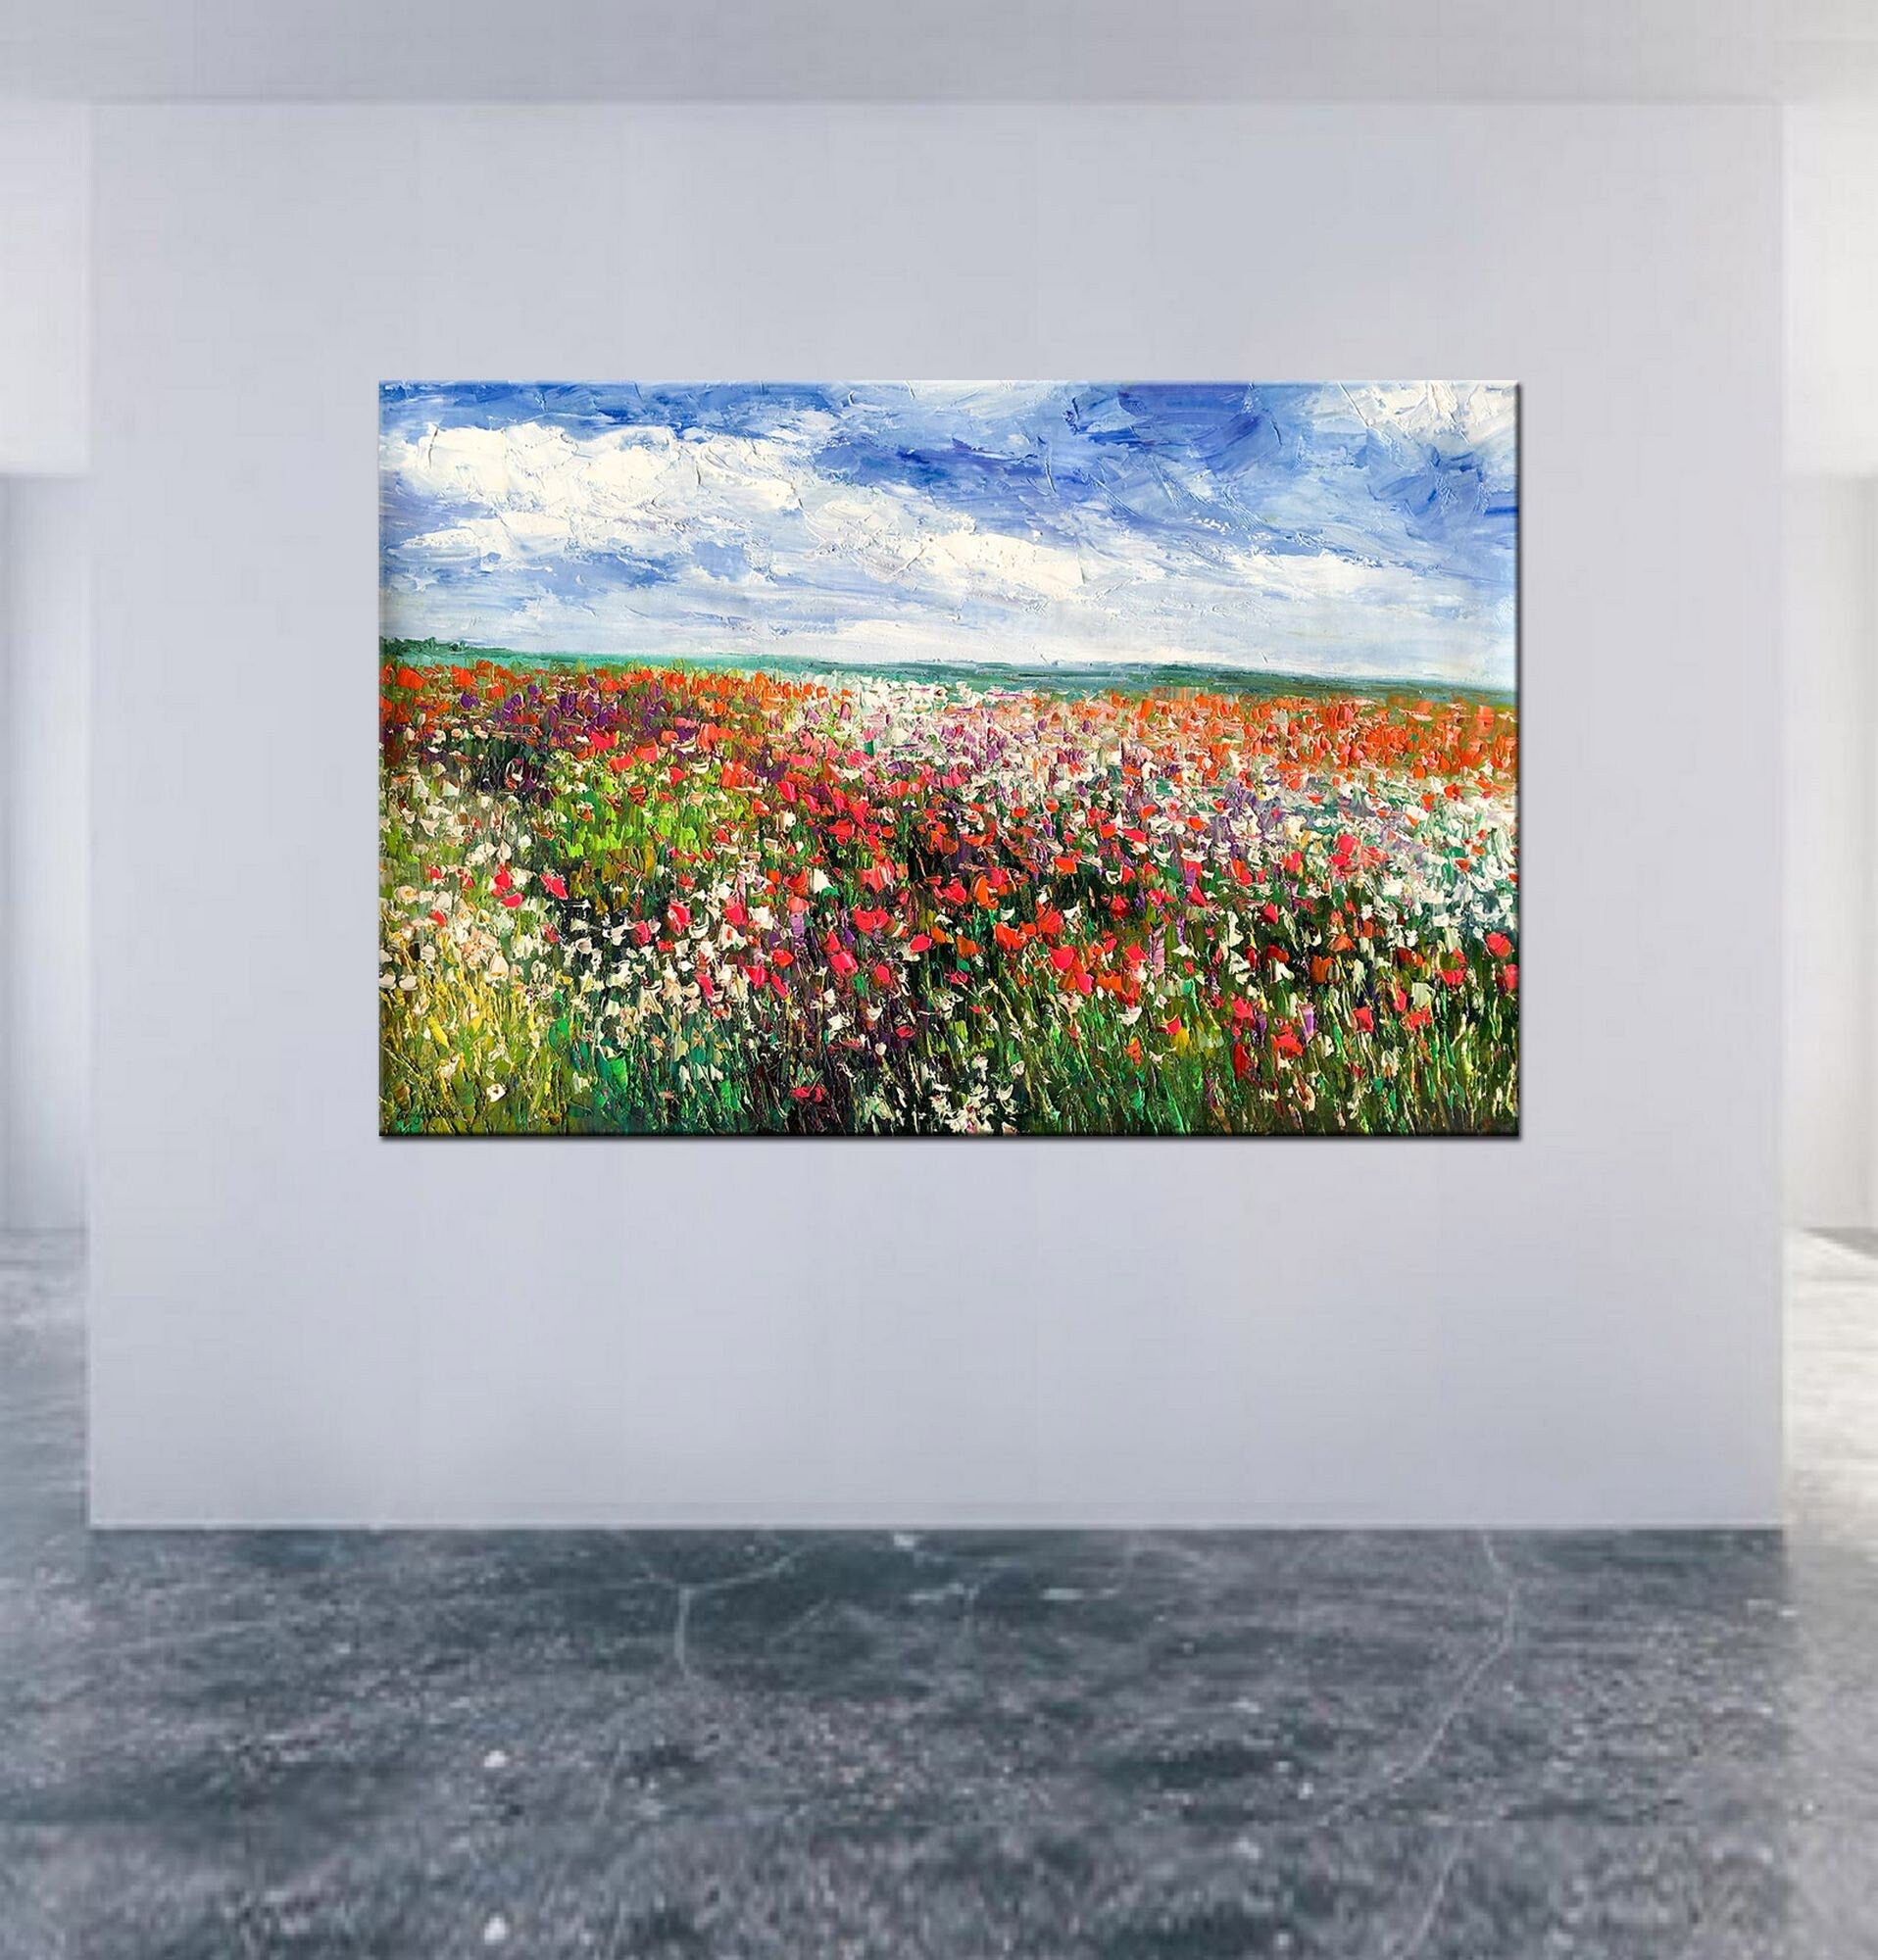 Large Oil Painting Spring Fields with Flowers, Wall Decor, Contemporary Art, Wall Decor, Abstract Landscape Painting, Canvas Painting